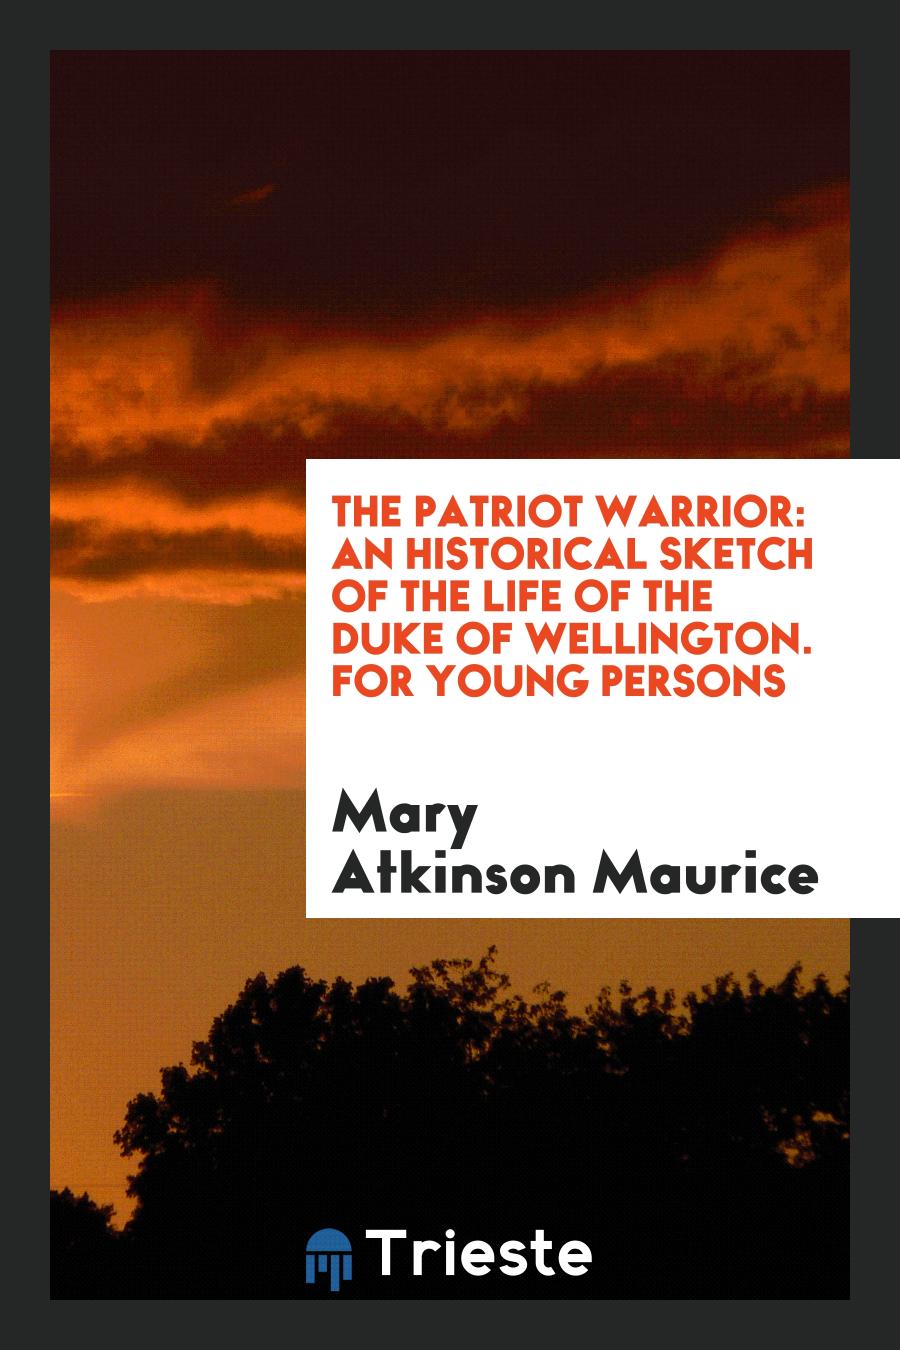 The Patriot Warrior: An Historical Sketch of the Life of the Duke of Wellington. For Young Persons